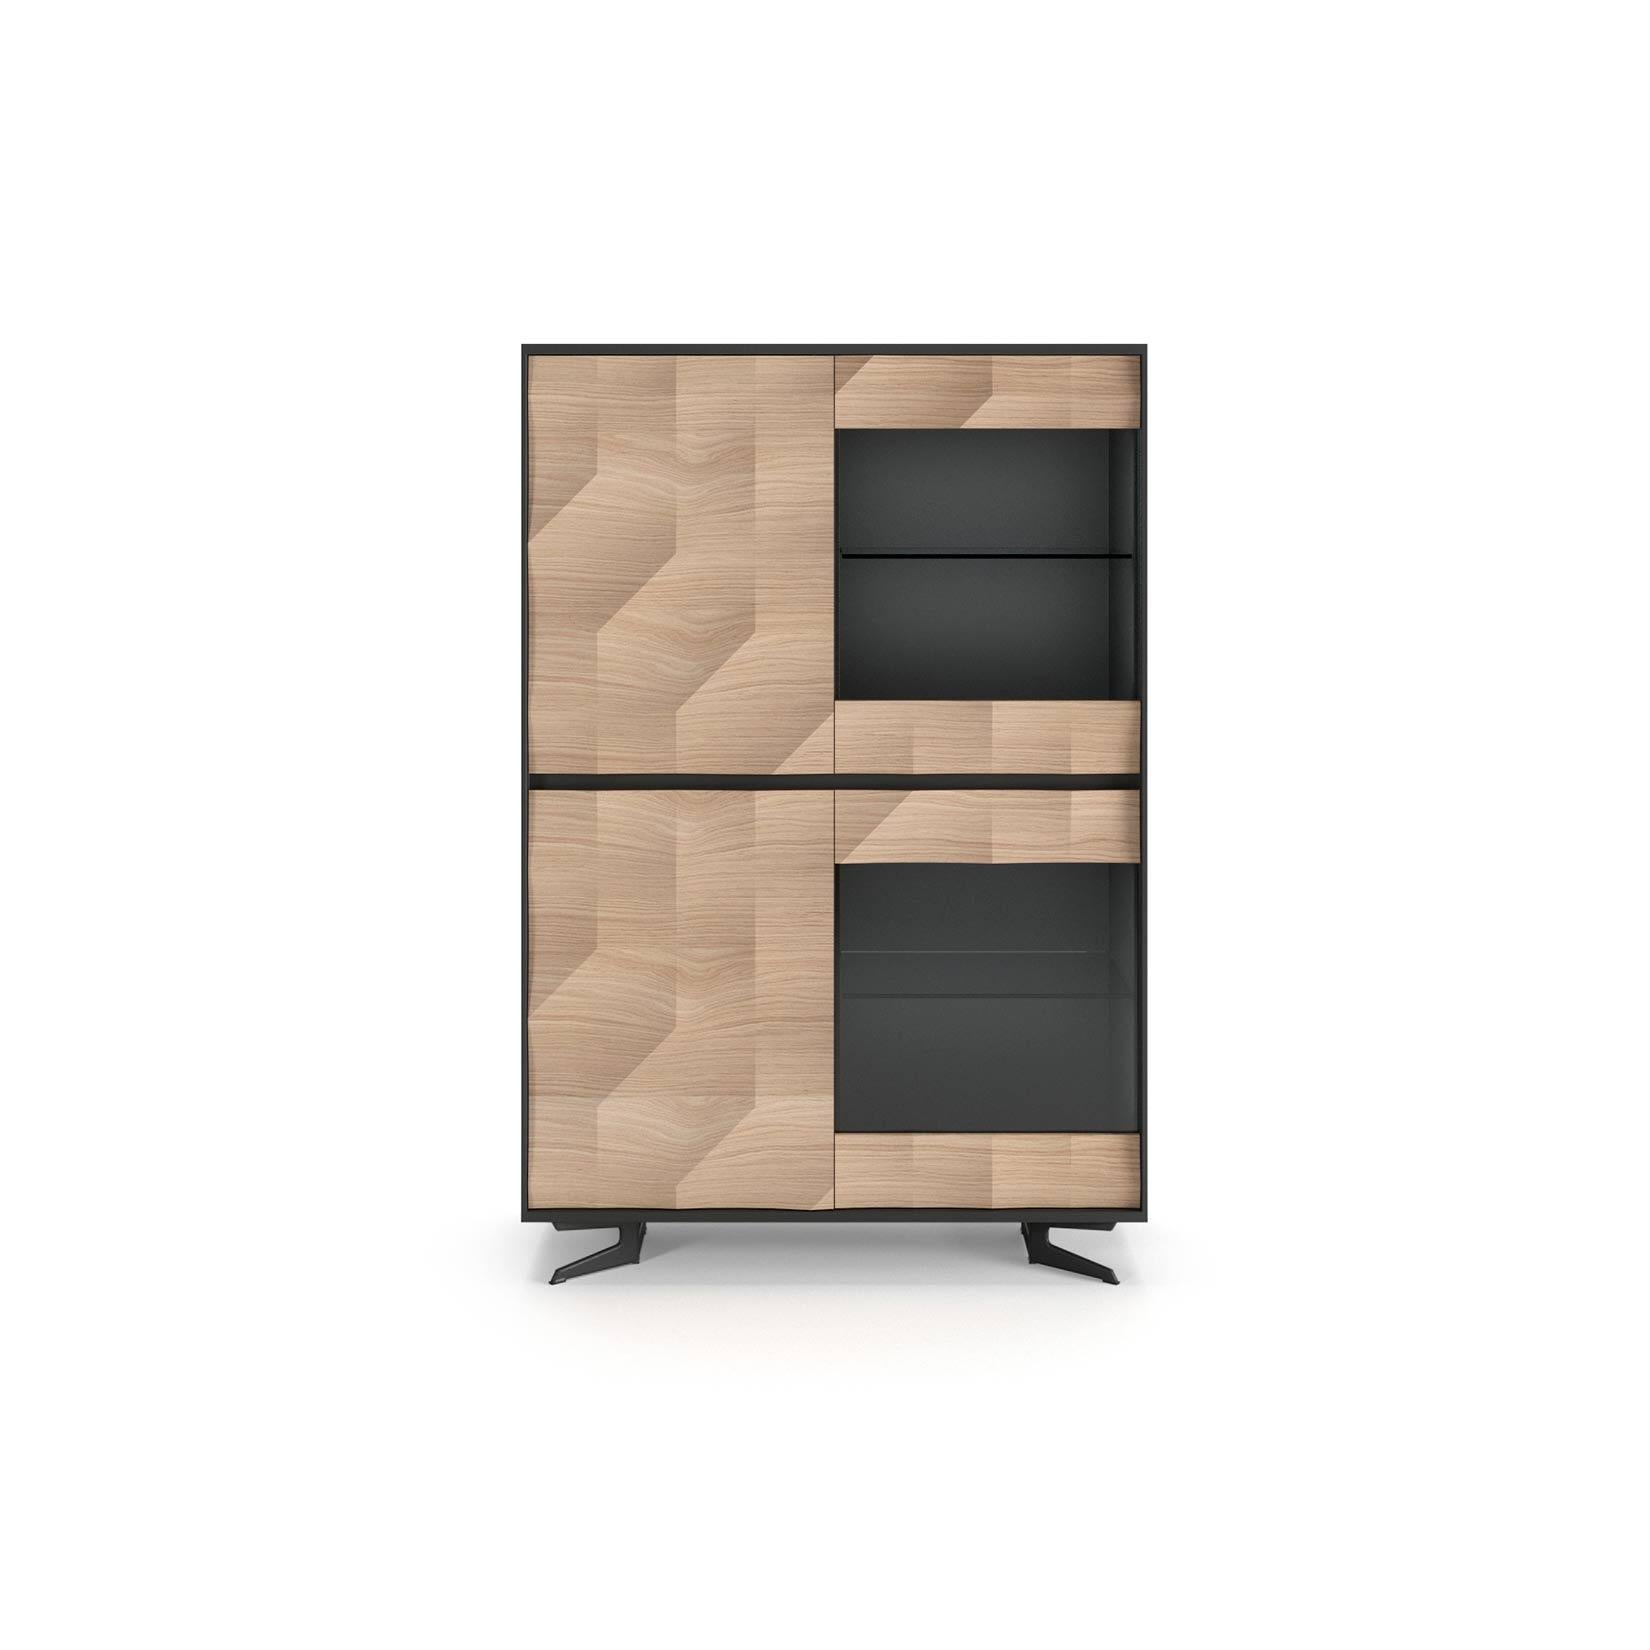 *Collection not sold in France, exclusive to Mobilier de France.*

Monte Carlo Showcase with 3 Wooden Doors and 1 Niche

The Monte Carlo collection stands out for its modern and sober look, through the combination of soft and neutral colors that